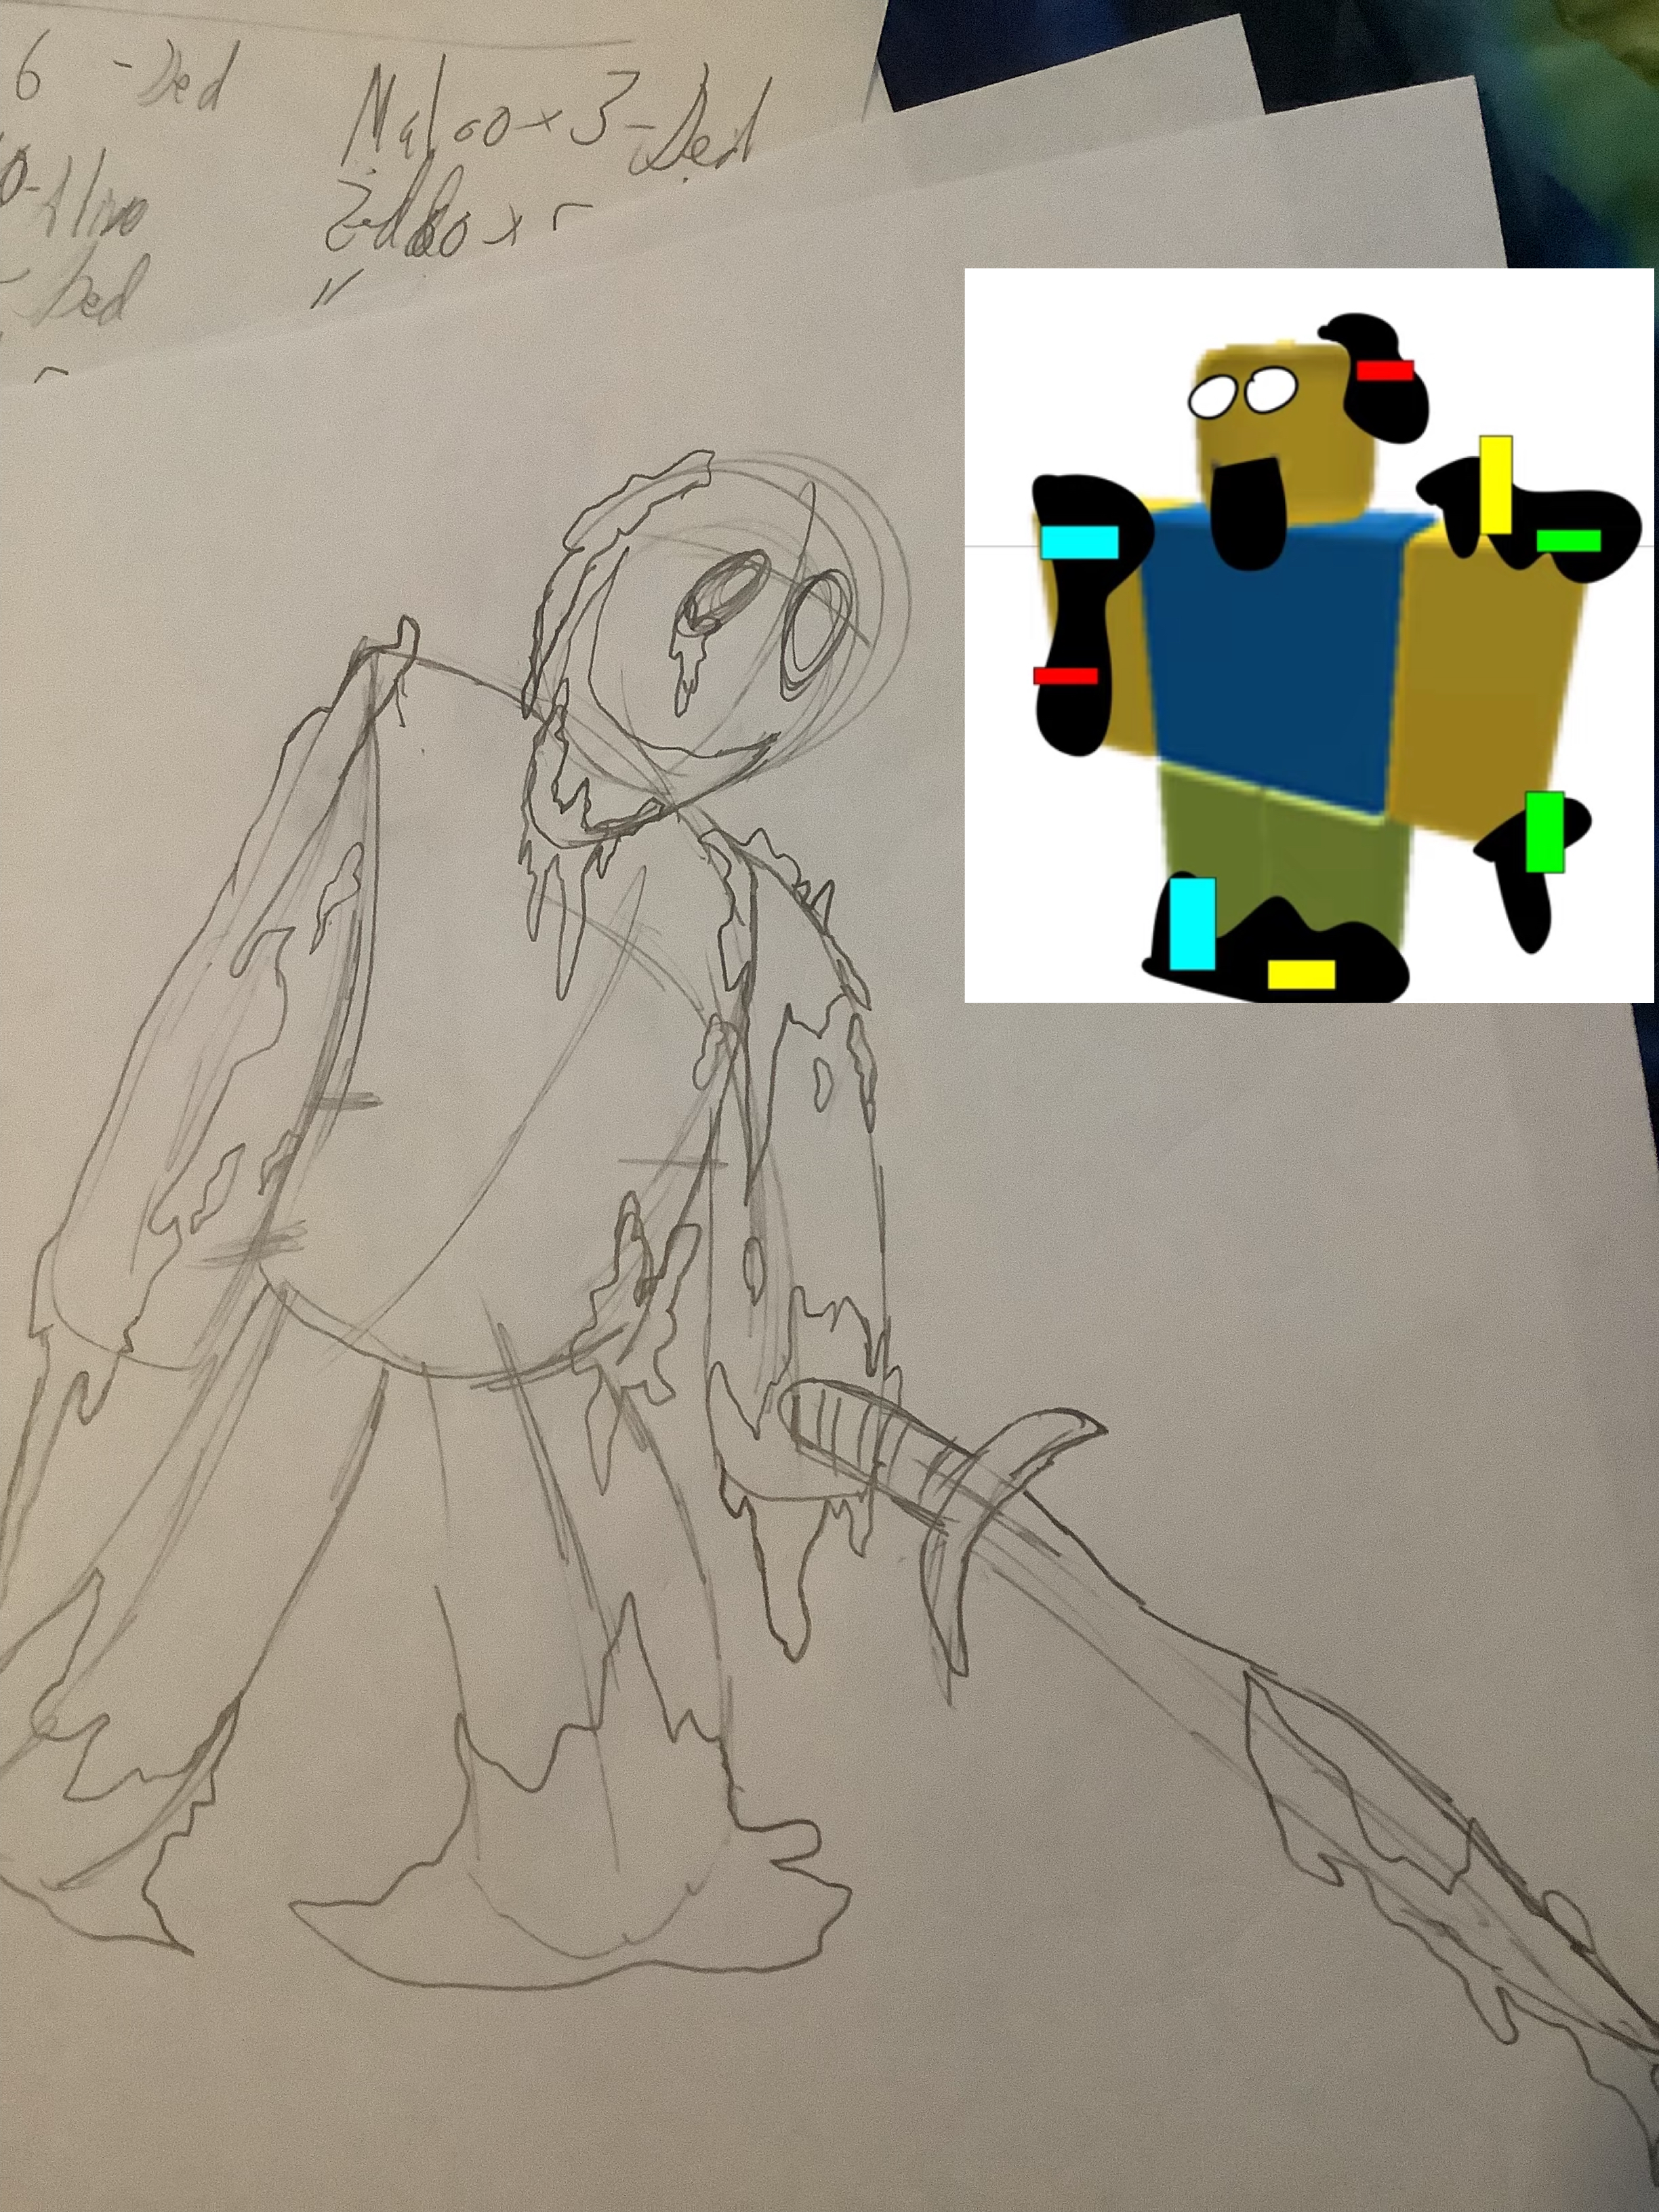 Roblox Noob drawing by Lucassunny on DeviantArt